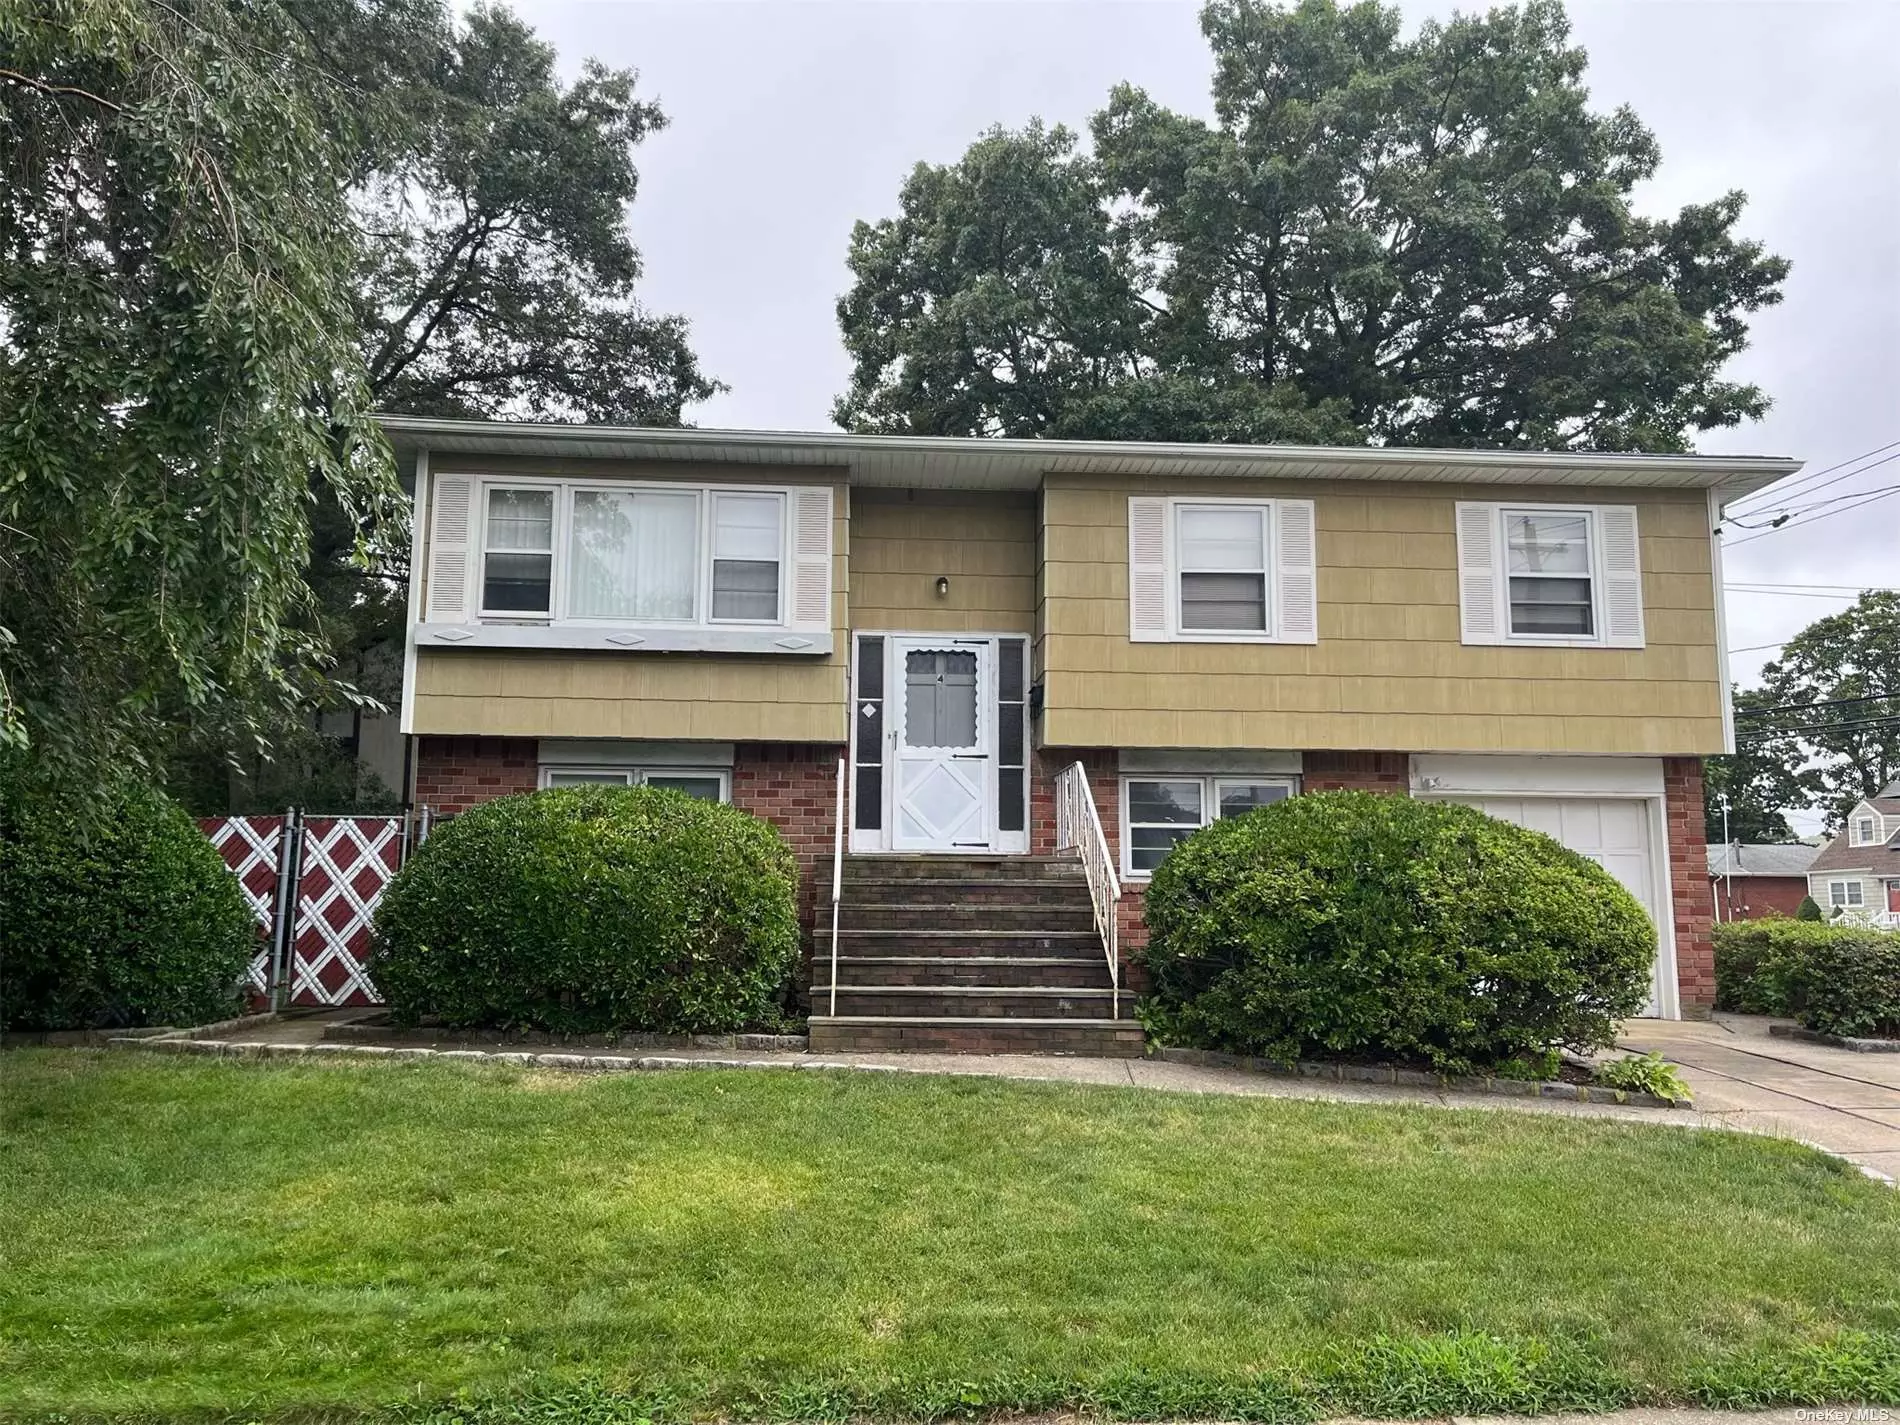 This home is in desirable Farmingdale schools. Excellent location, close to all. Bring mom ( with proper permits)